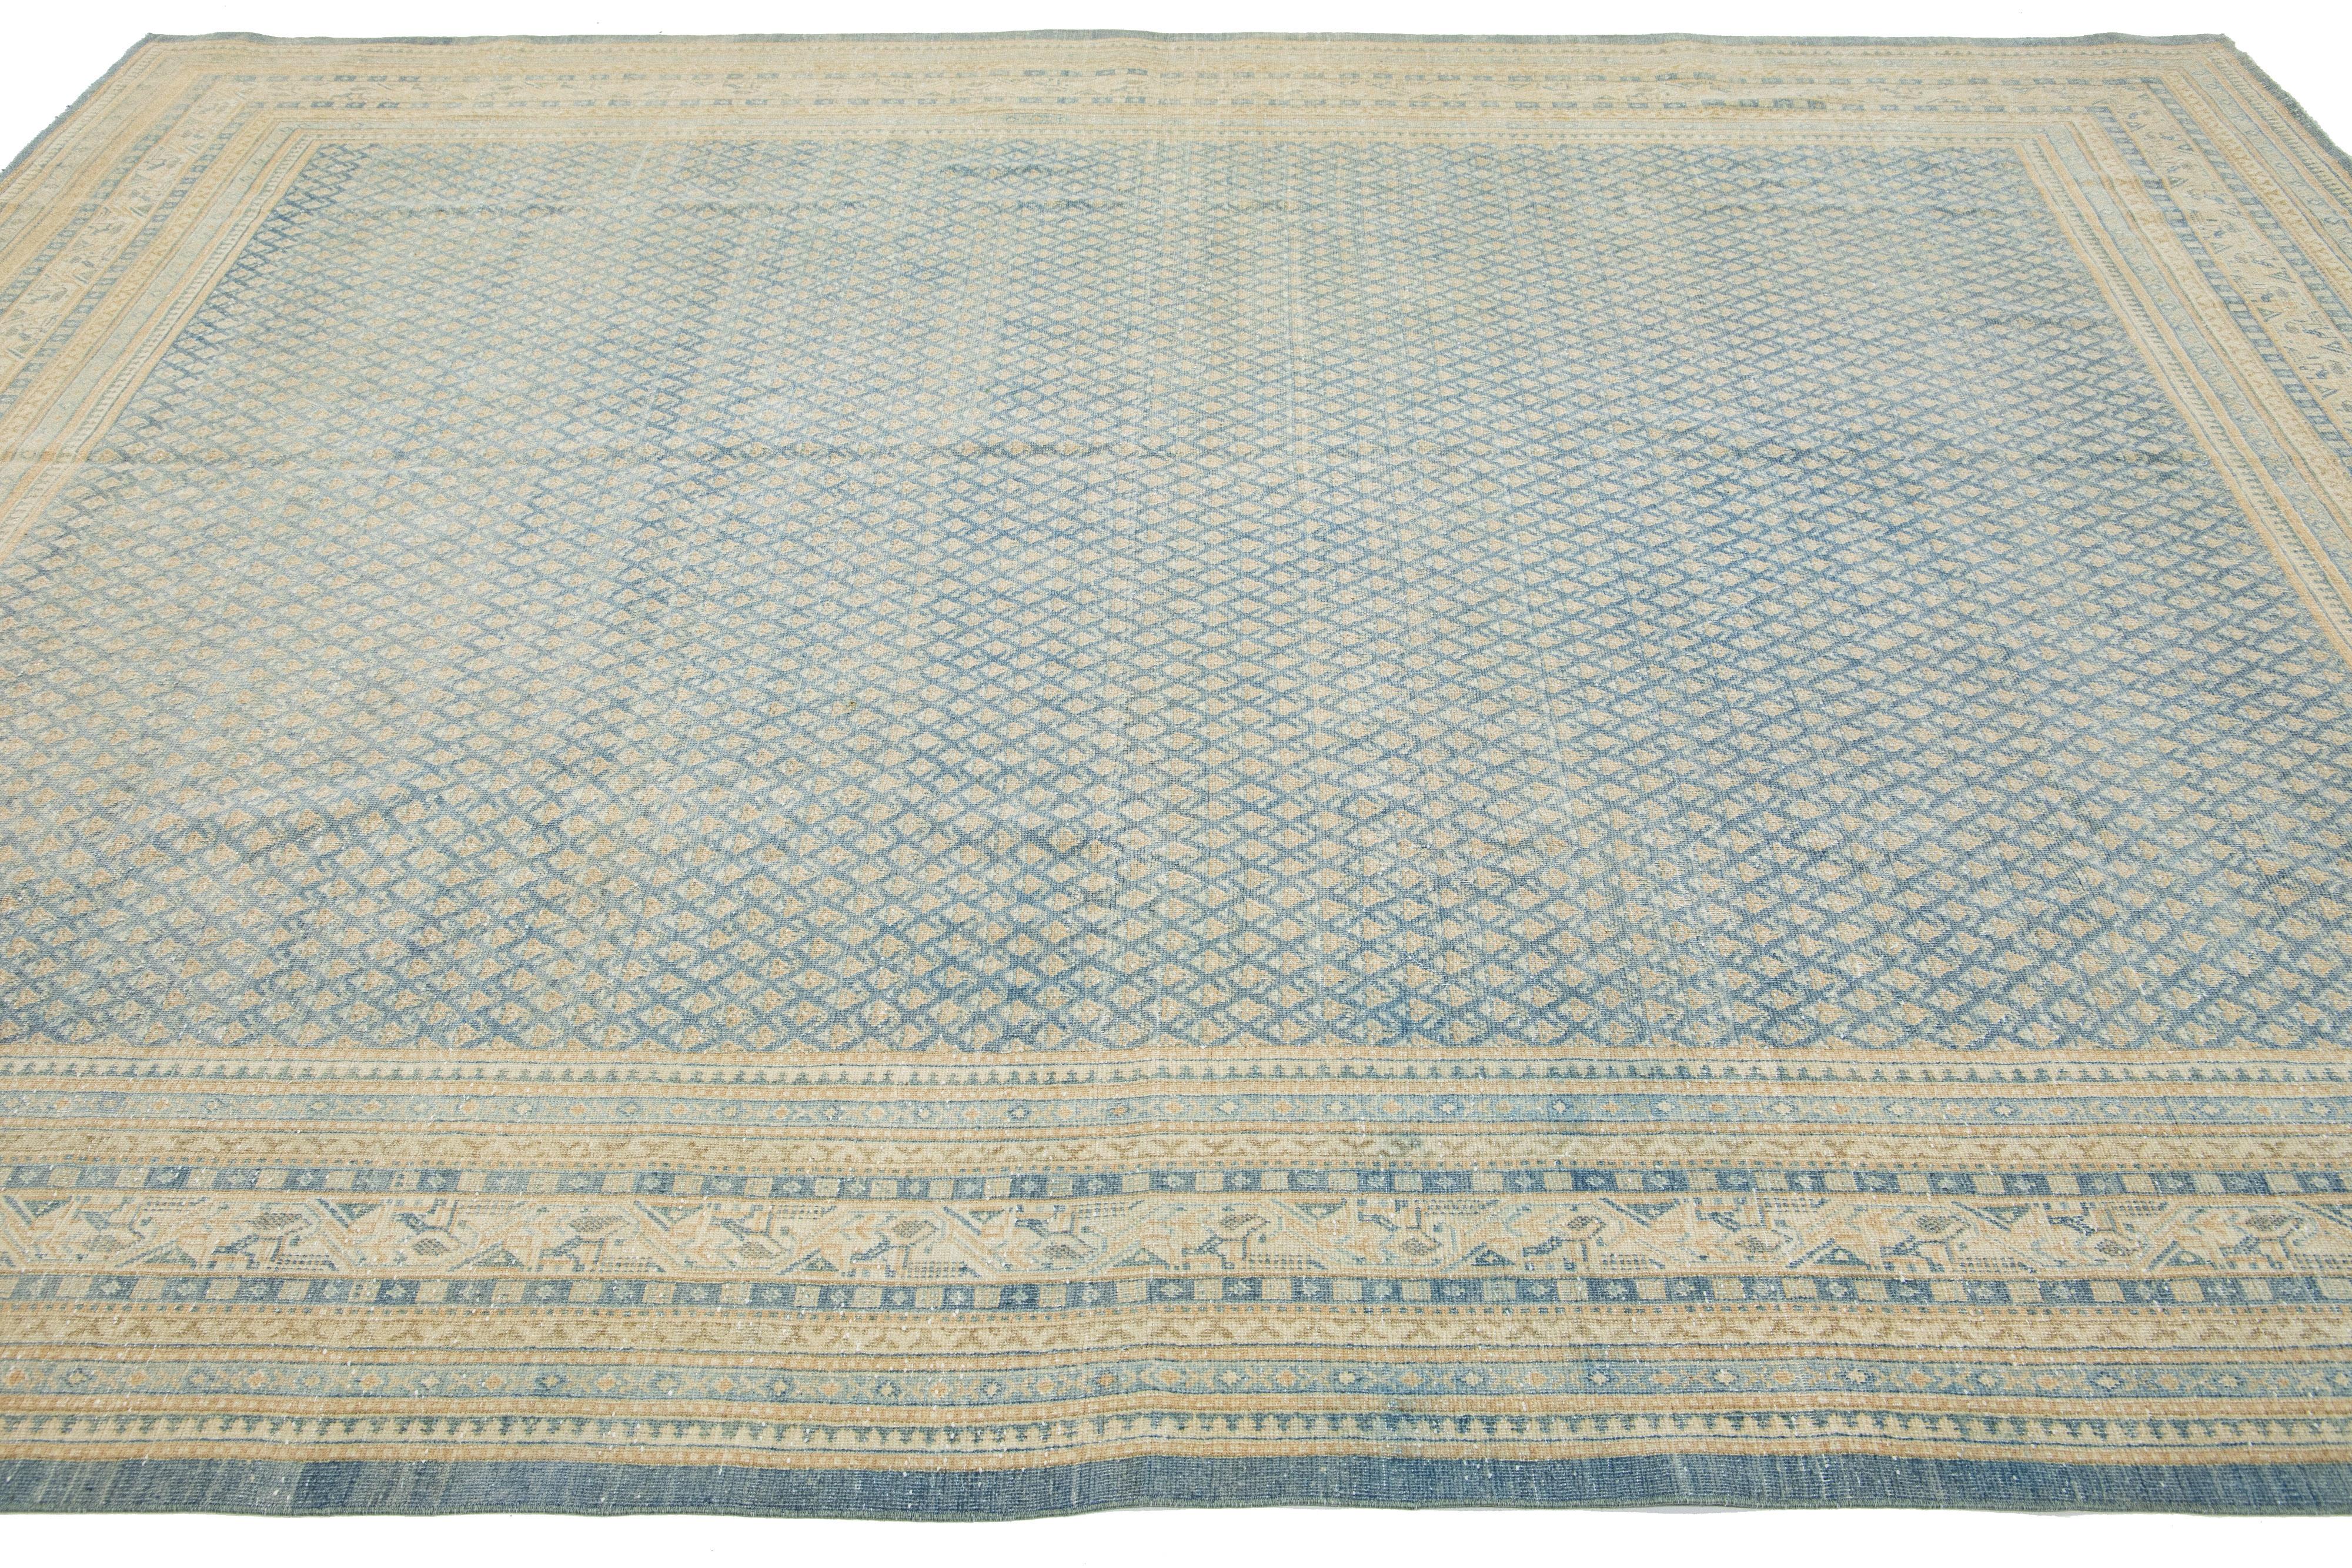 20th Century Handmade Antique Persian Tabriz Wool Rug Featuring a Blue and Beige Pattern For Sale